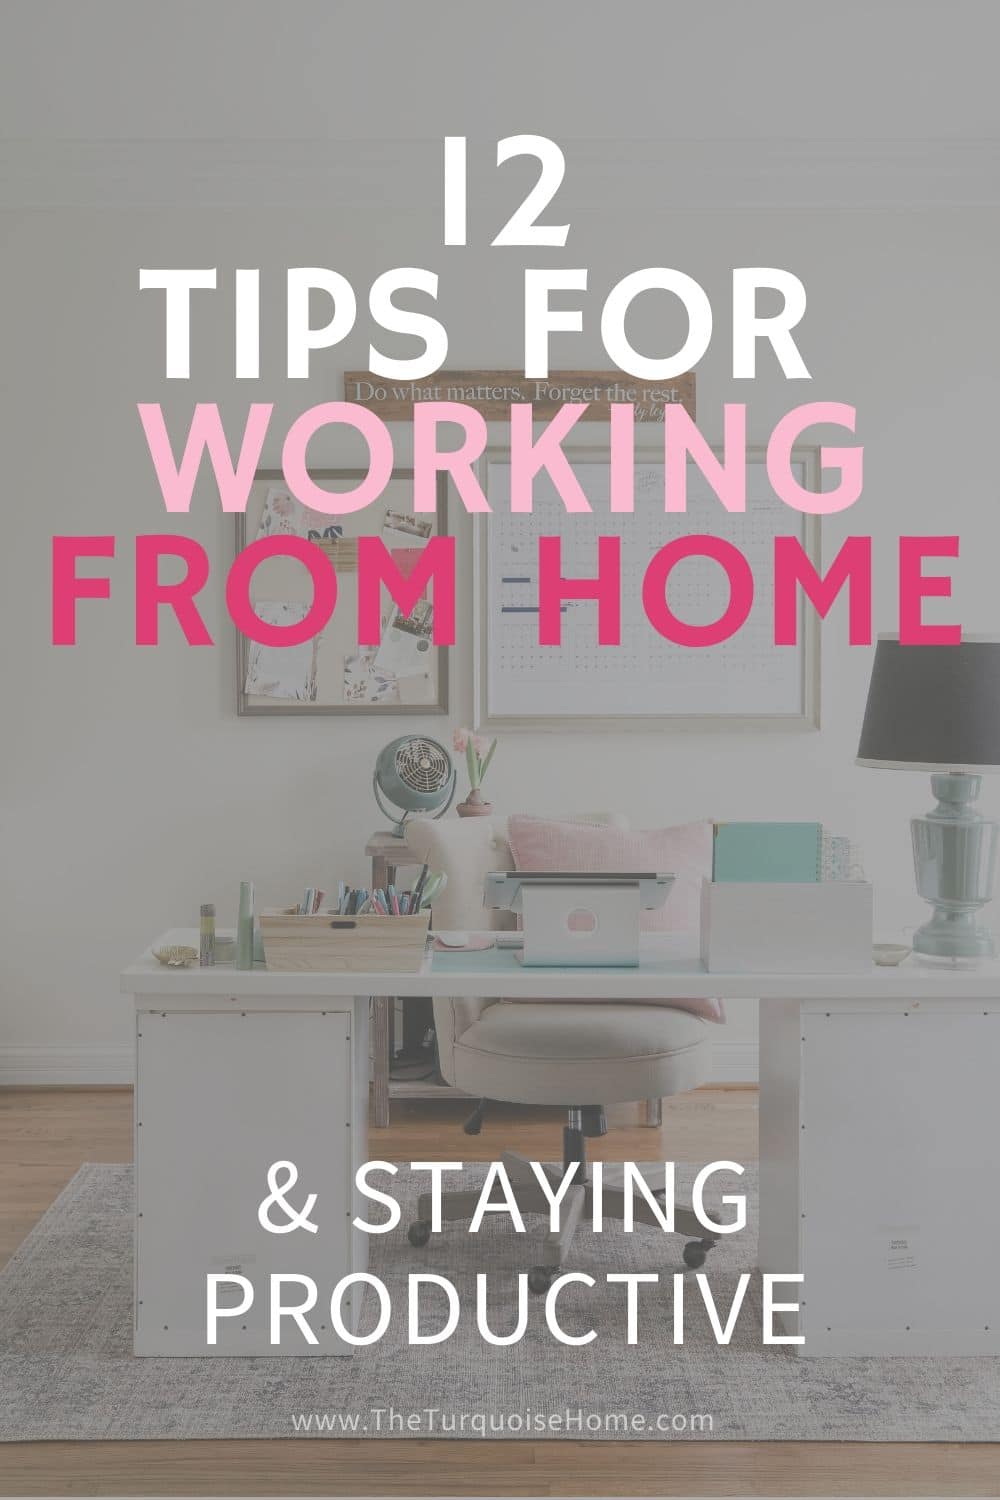 12 Tips for Working from Home & Staying Productive